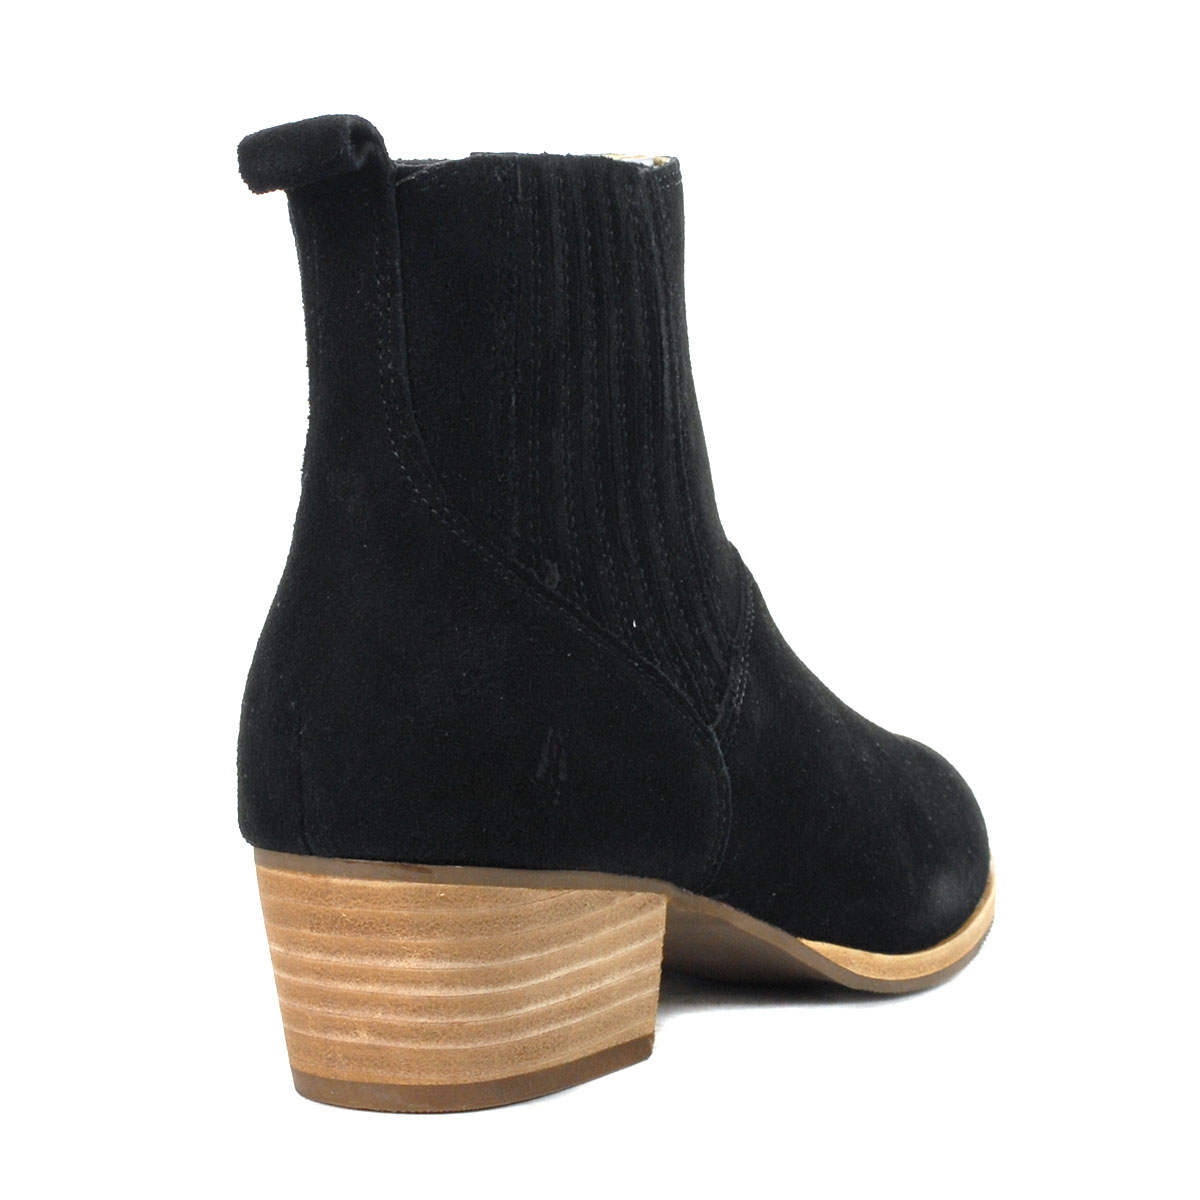 Hush Puppies Sierra Bold Black Suede Chelsea Boots H509838 - WOOKI.COM